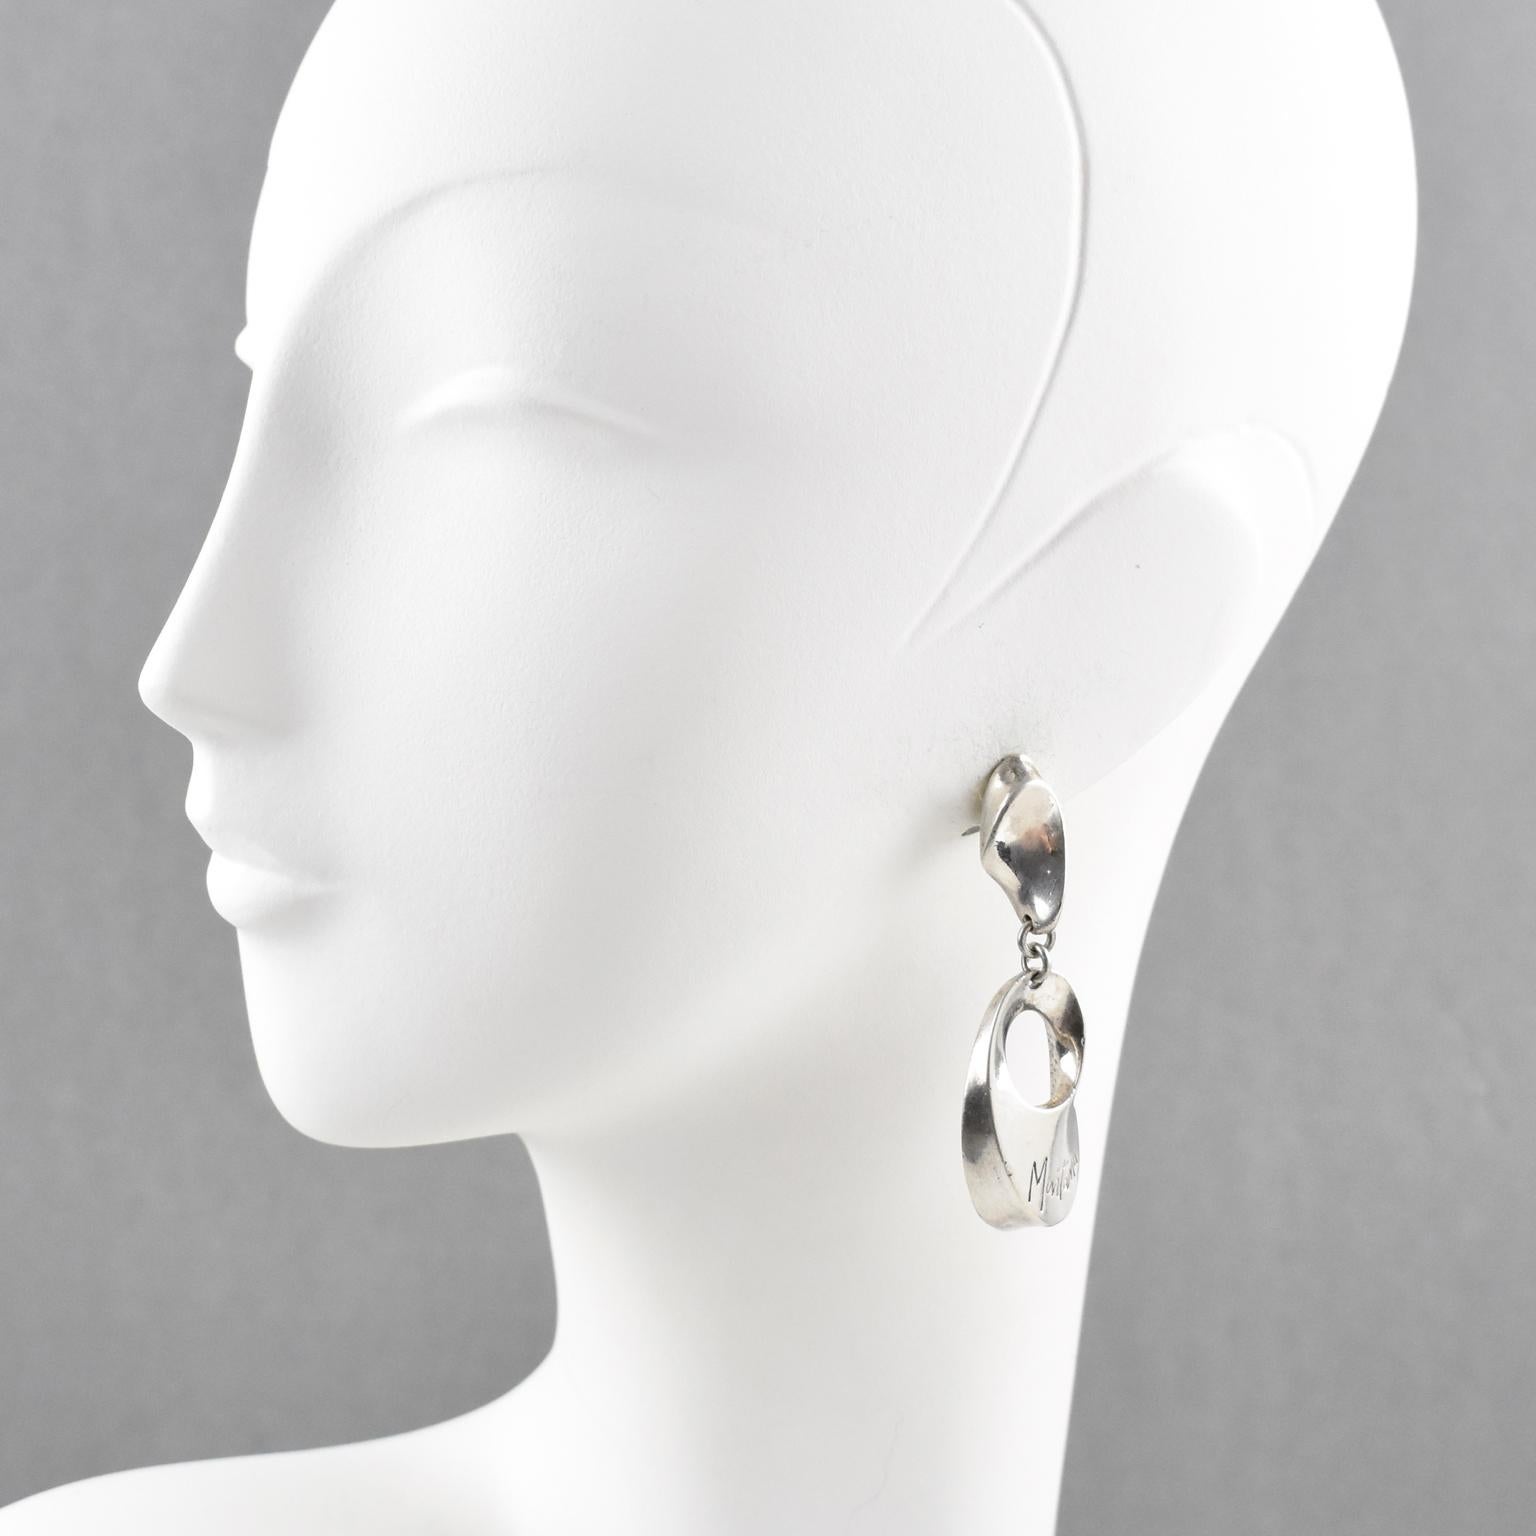 Modernist geometric clip on earrings designed by Claude Montana. Silver plate dangling shape with twisted and pierced elements. Engraved 'Montana' on front.
Measurements: 2.57 in. high (6.5 cm) x 0.82 in. wide (2.1 cm)
Check our storefront or with